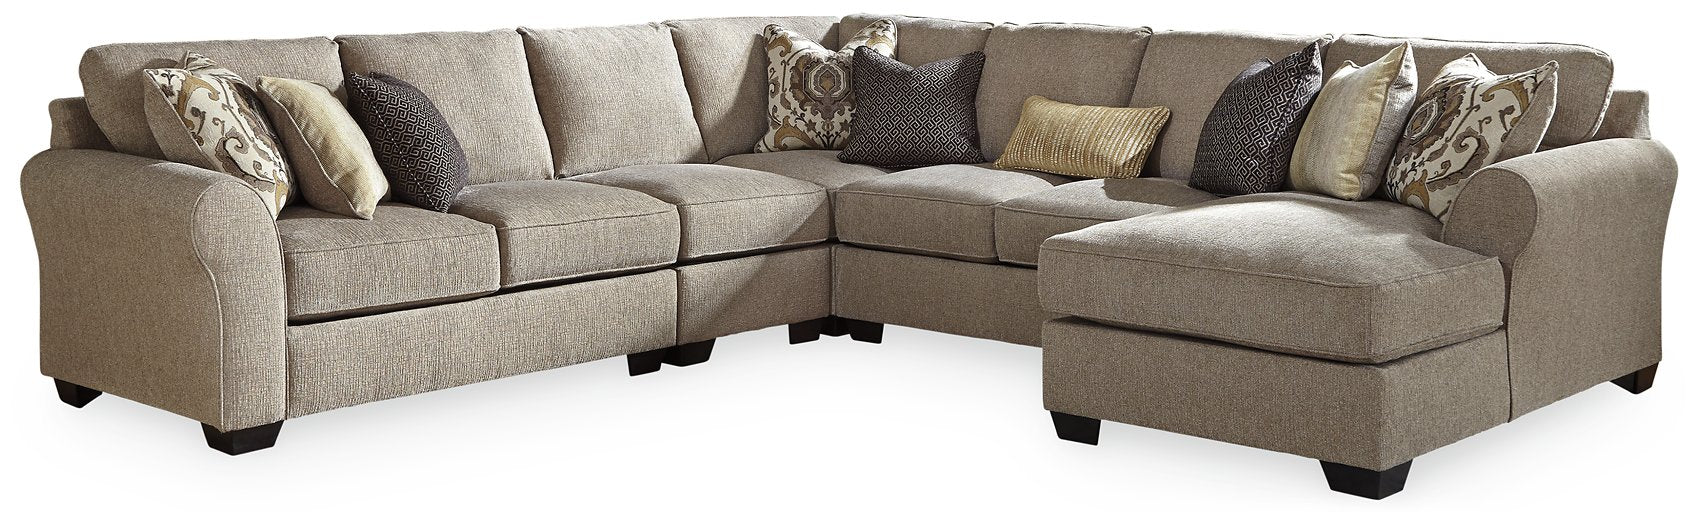 Pantomine Sectional with Chaise - The Warehouse Mattresses, Furniture, & More (West Jordan,UT)